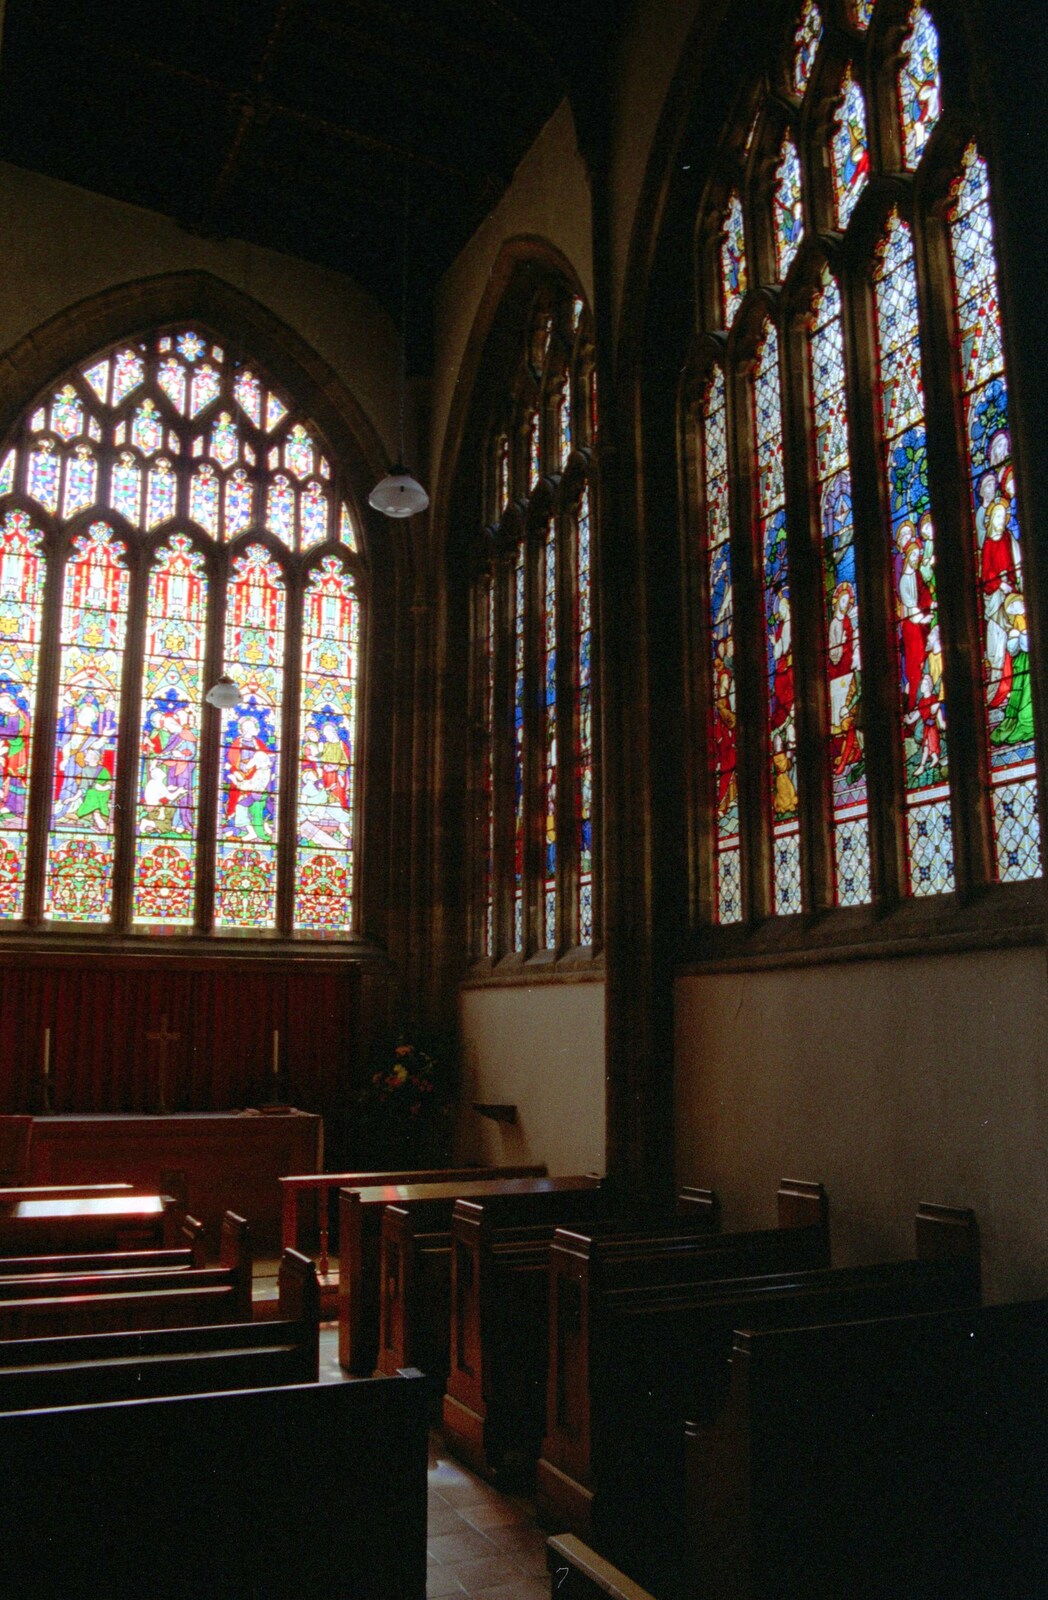 Uni: A Trip to Swindon, Shaftesbury, and the Tamar Bridge, Wiltshire, Dorset and Devon - 28th May 1989: Stained glass windows